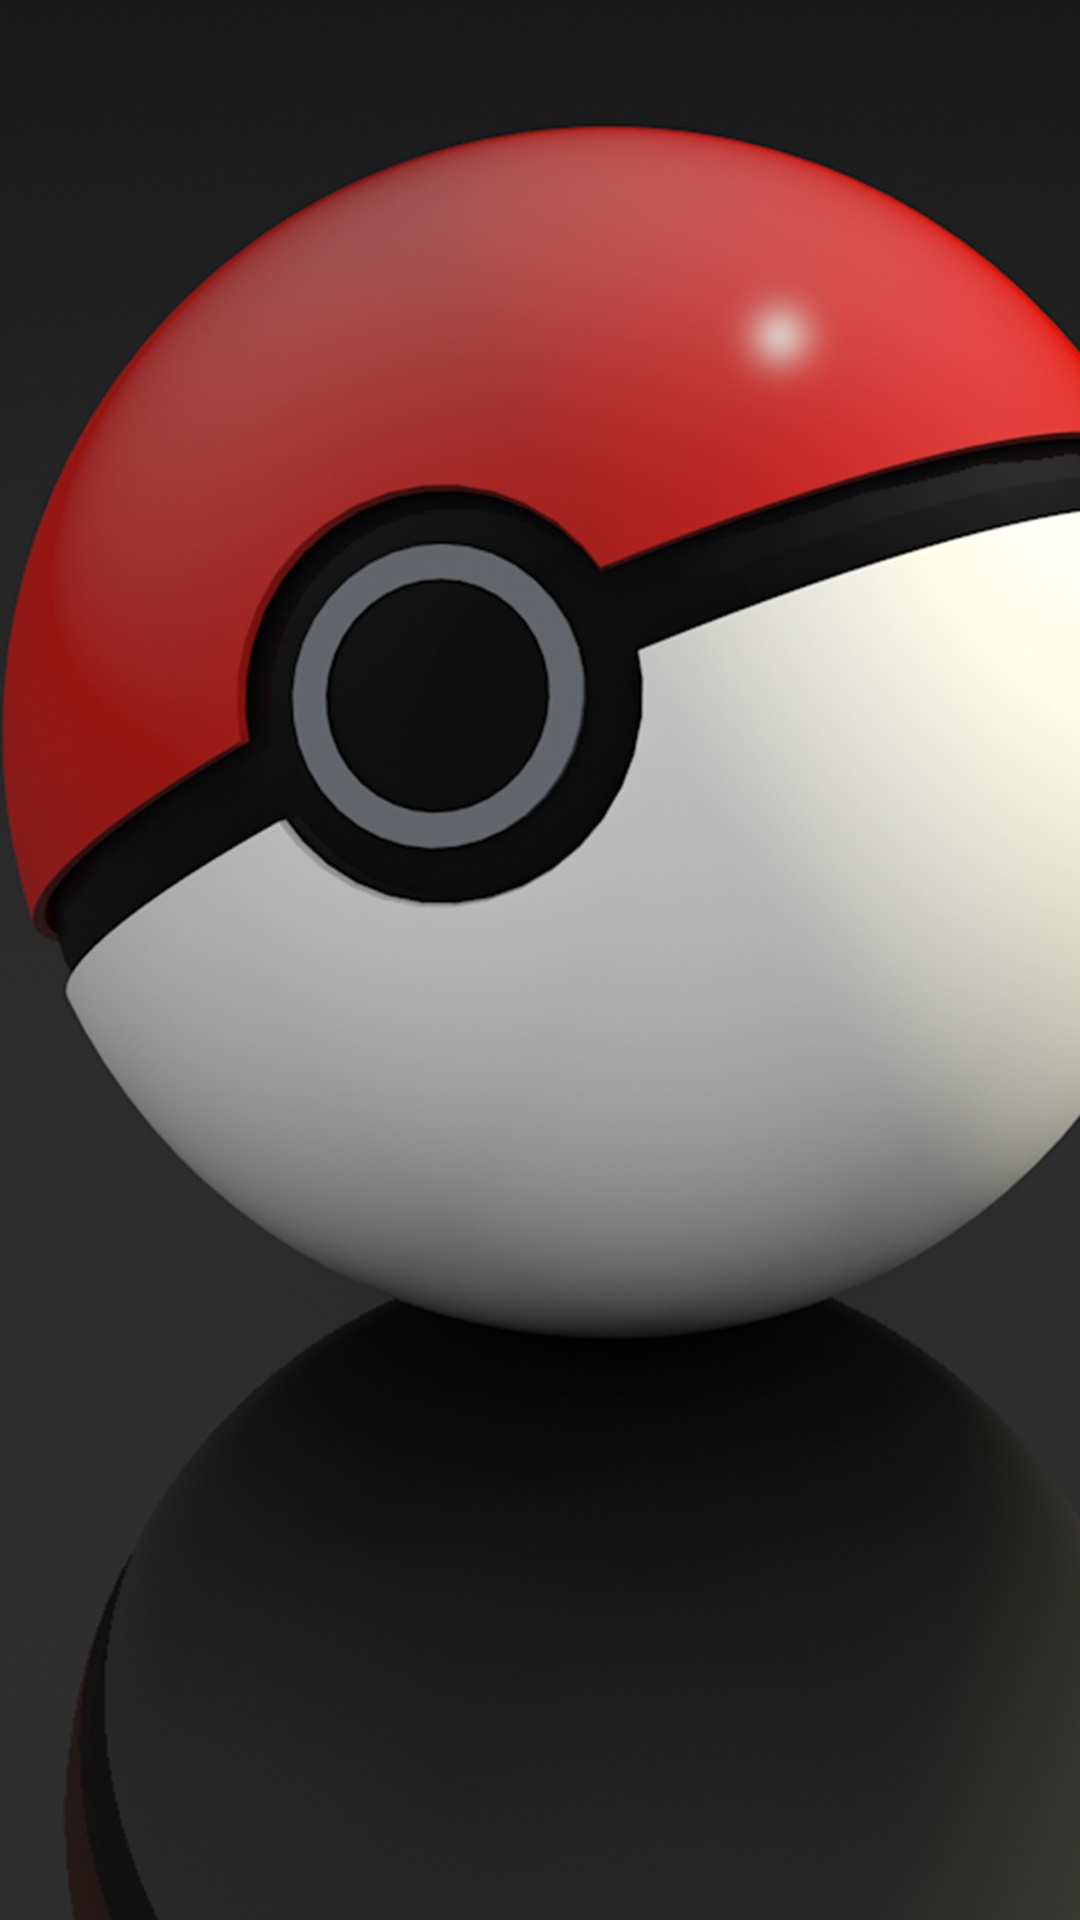 Pok Ball, Ball, Animation, Auge, Games. Wallpaper in 1080x1920 Resolution